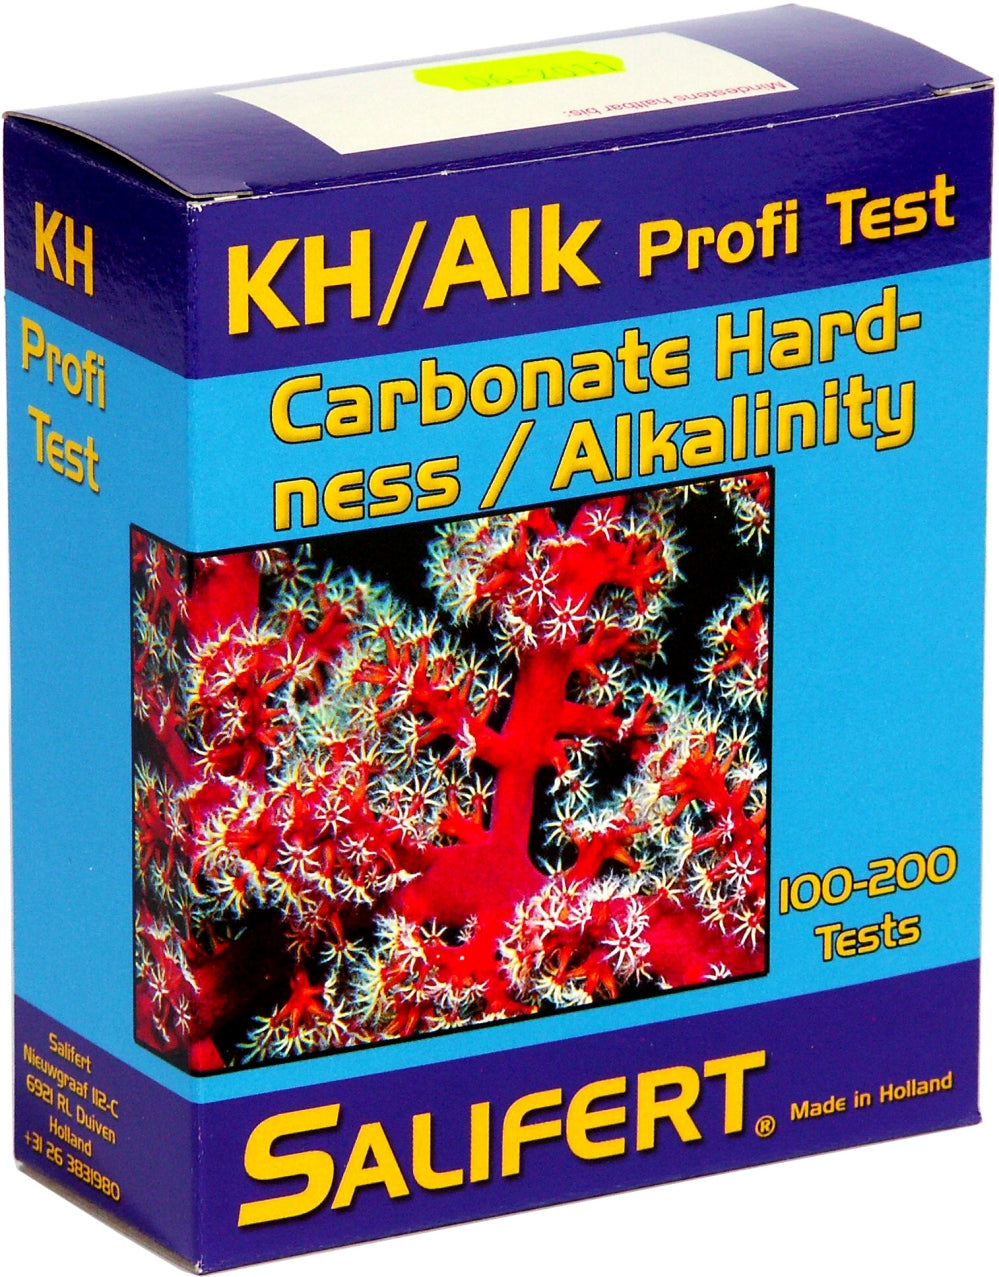 Salifert KH/Alk Test Kit available at Coral Passion in Essex